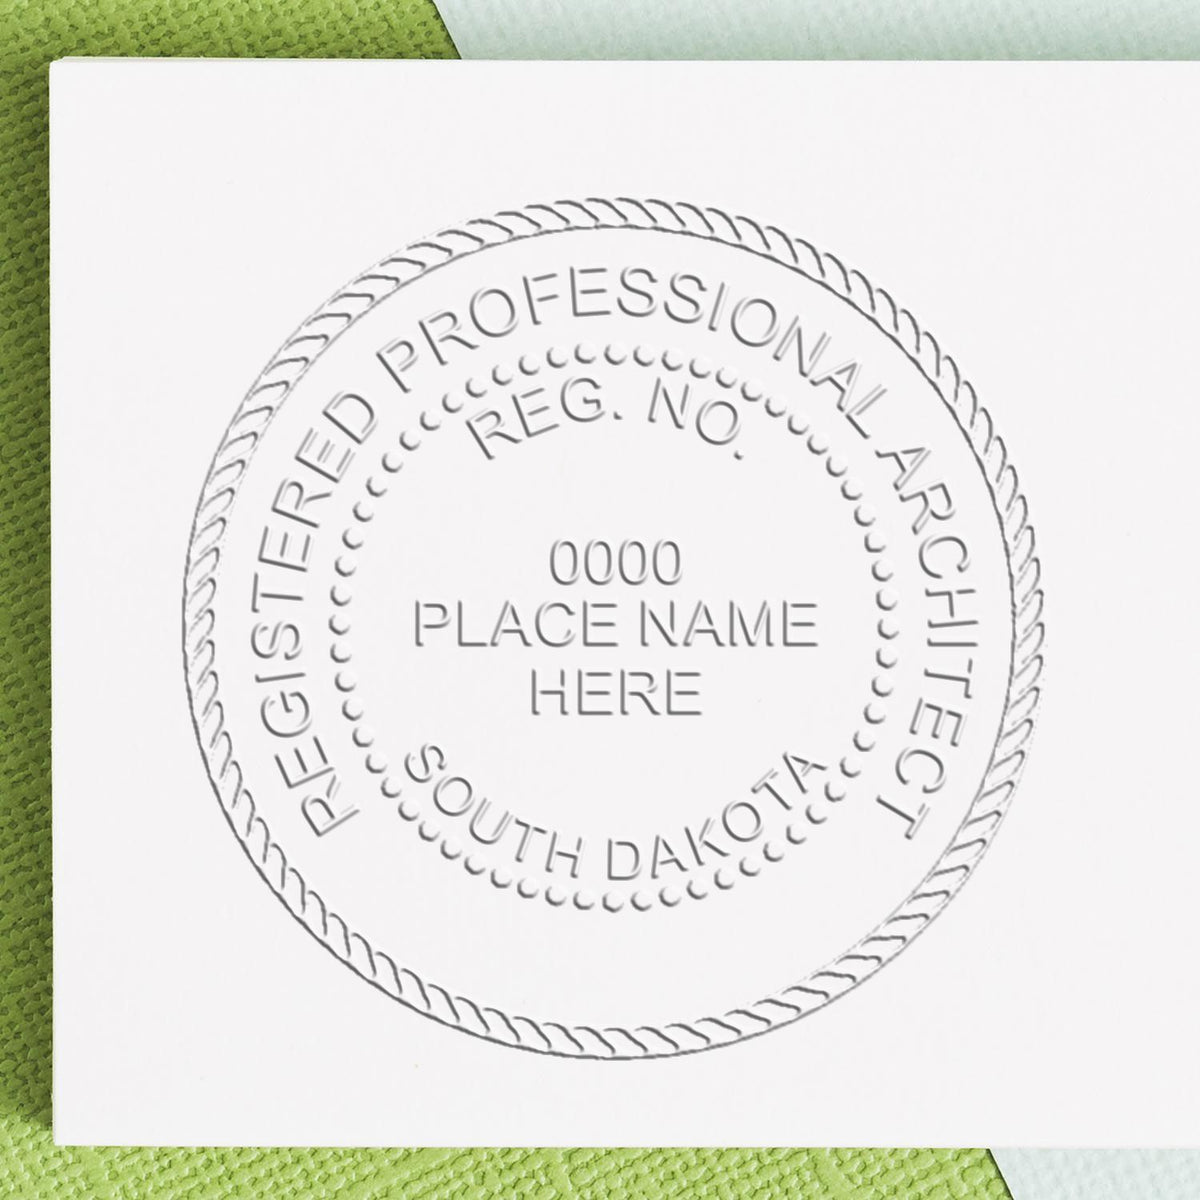 The Gift South Dakota Architect Seal stamp impression comes to life with a crisp, detailed image stamped on paper - showcasing true professional quality.